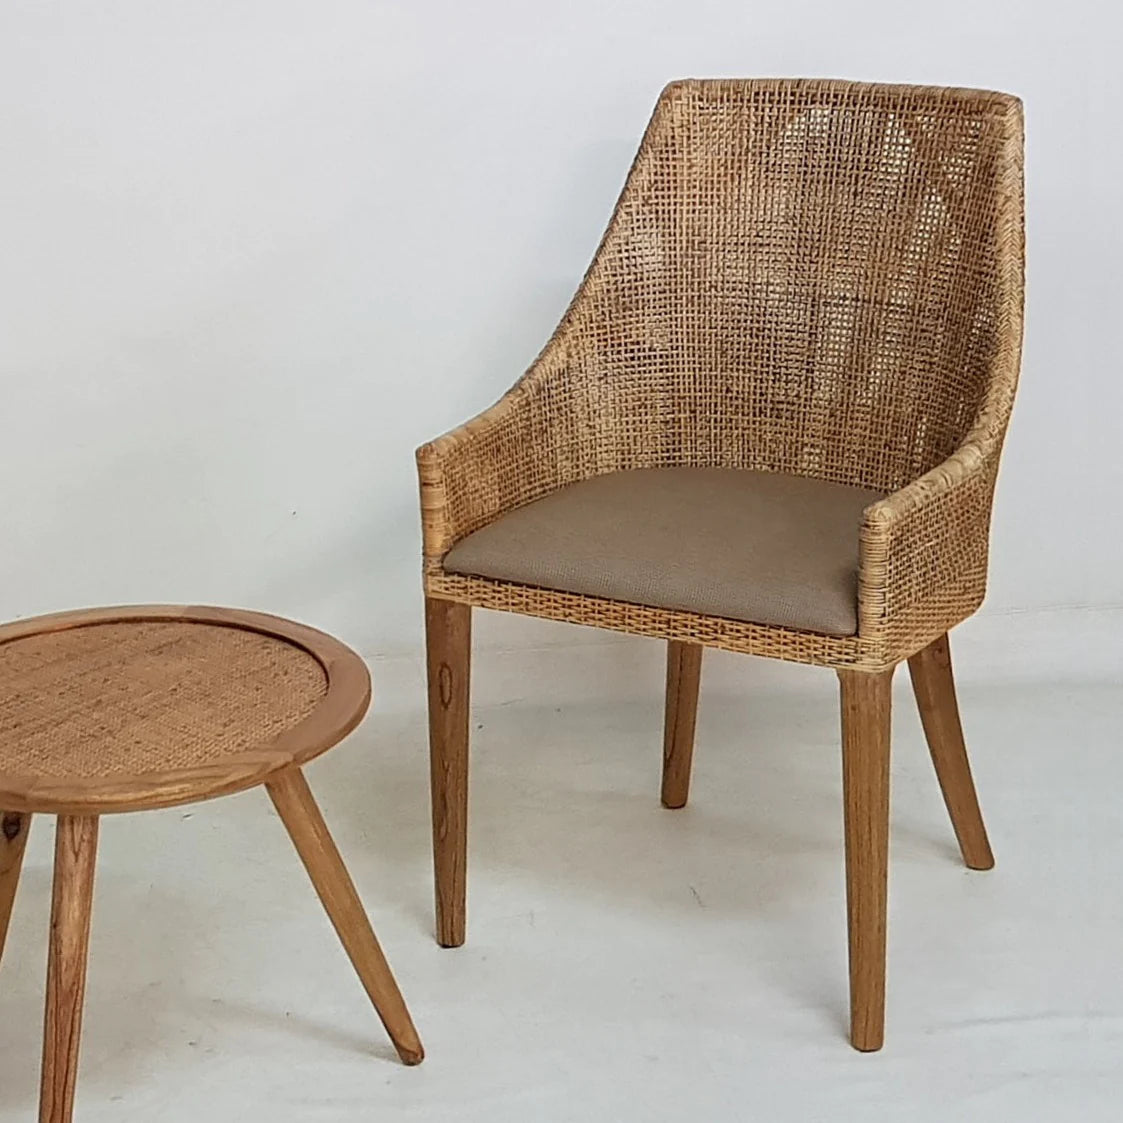 Rattan & Sustainability: Is It Really More Eco-friendly?